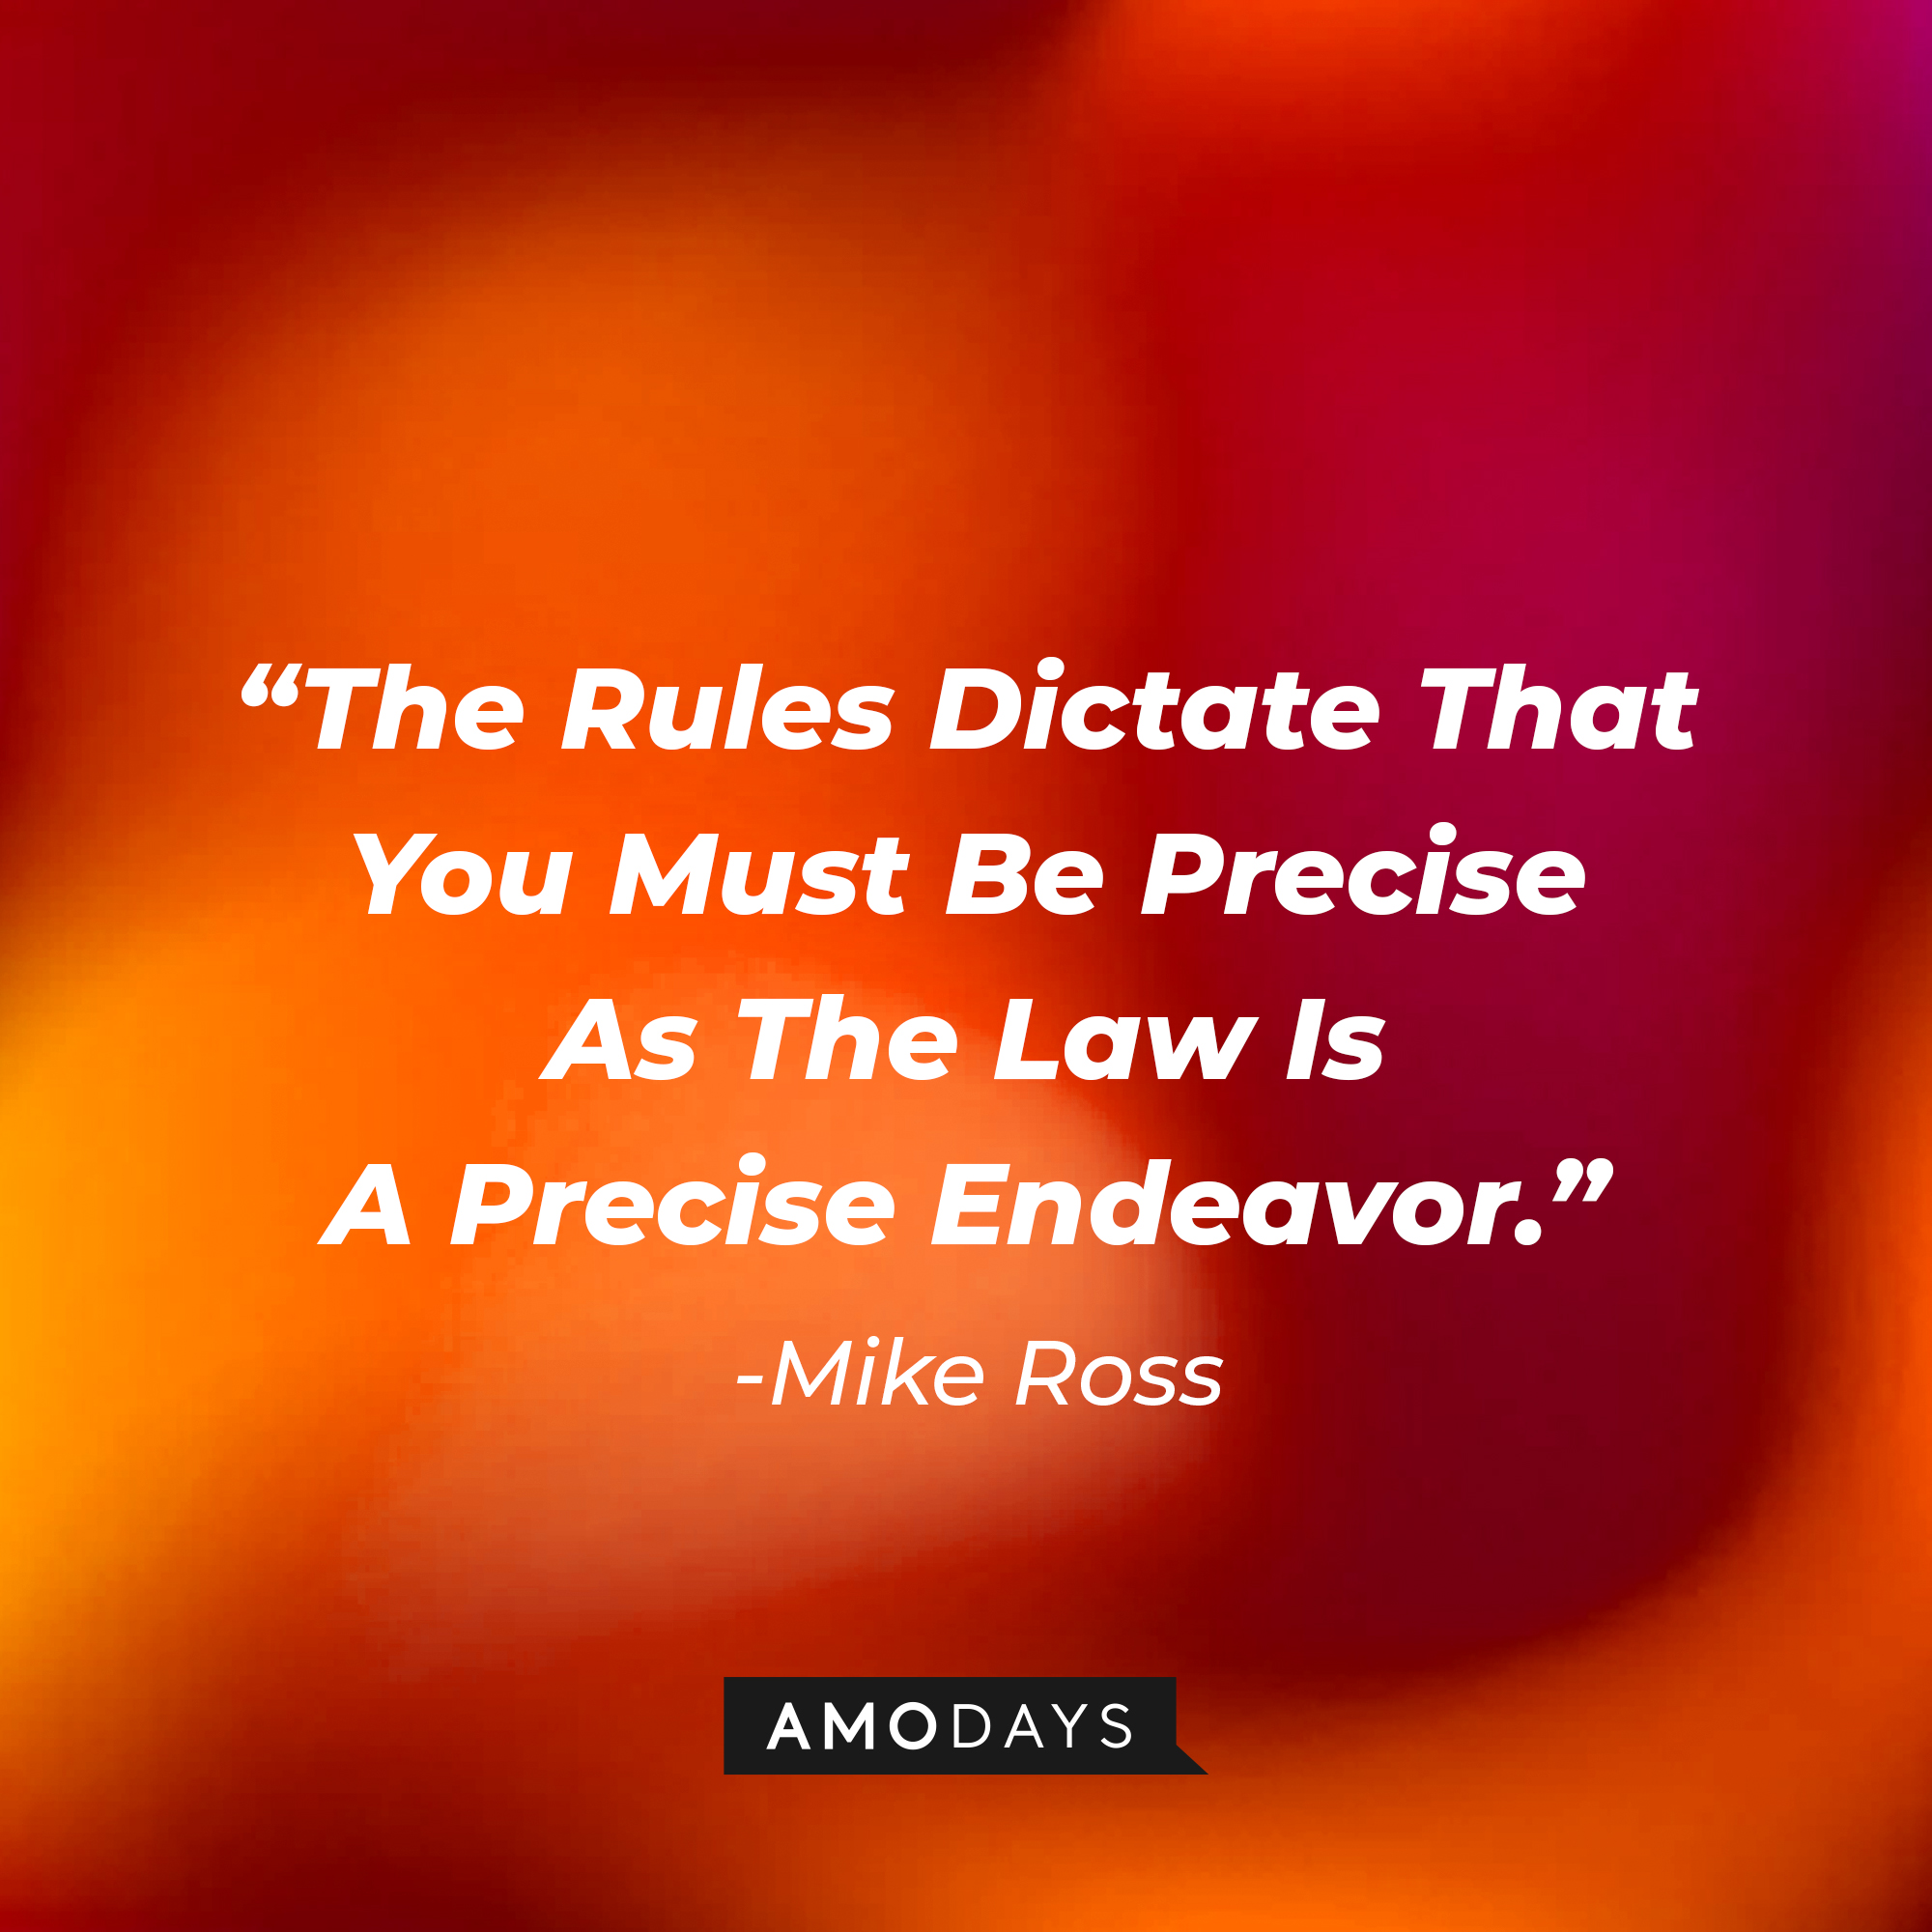 Mike Ross's quote on "Suits" : "The Rules Dictate That You Must Be Precise As The Law Is A Precise Endeavor." | Source: Amodays